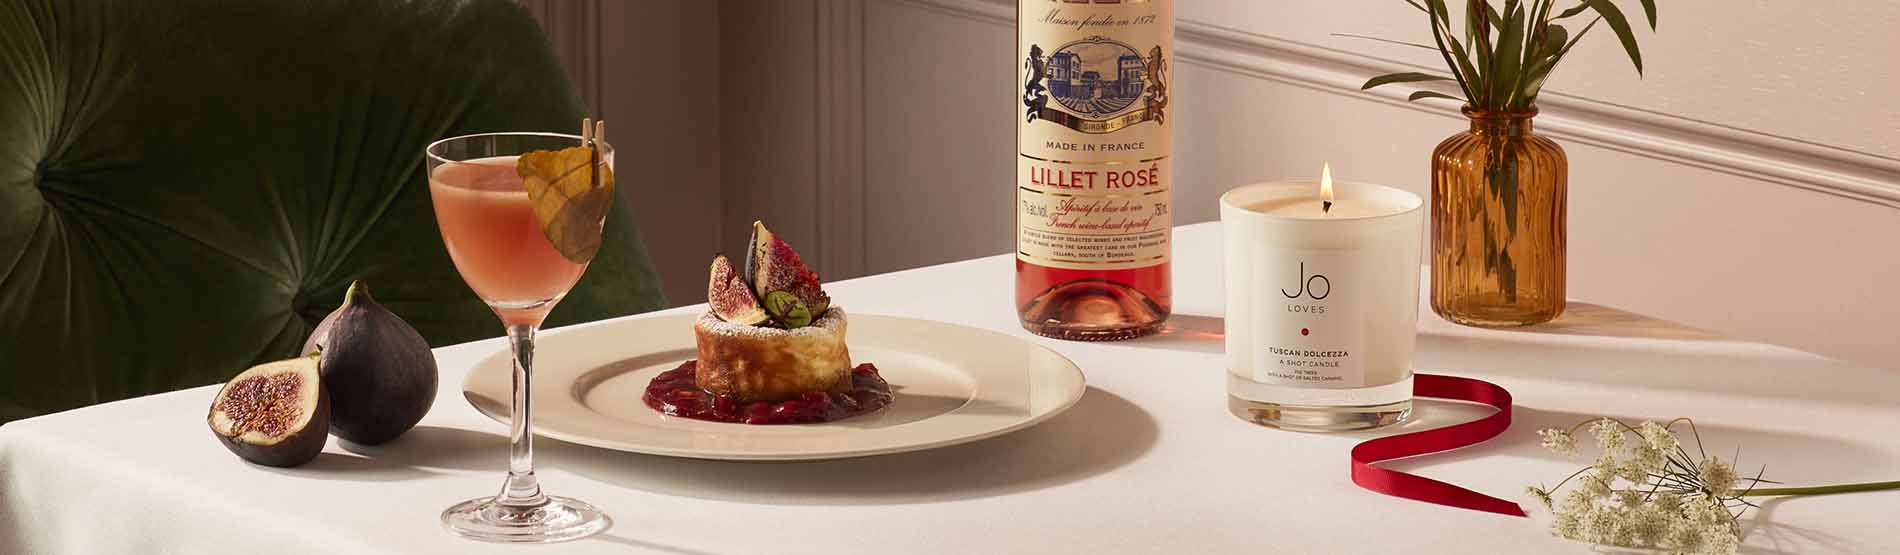 Lillet rose wine, jo loves candle and a festive dish served at the Kensington